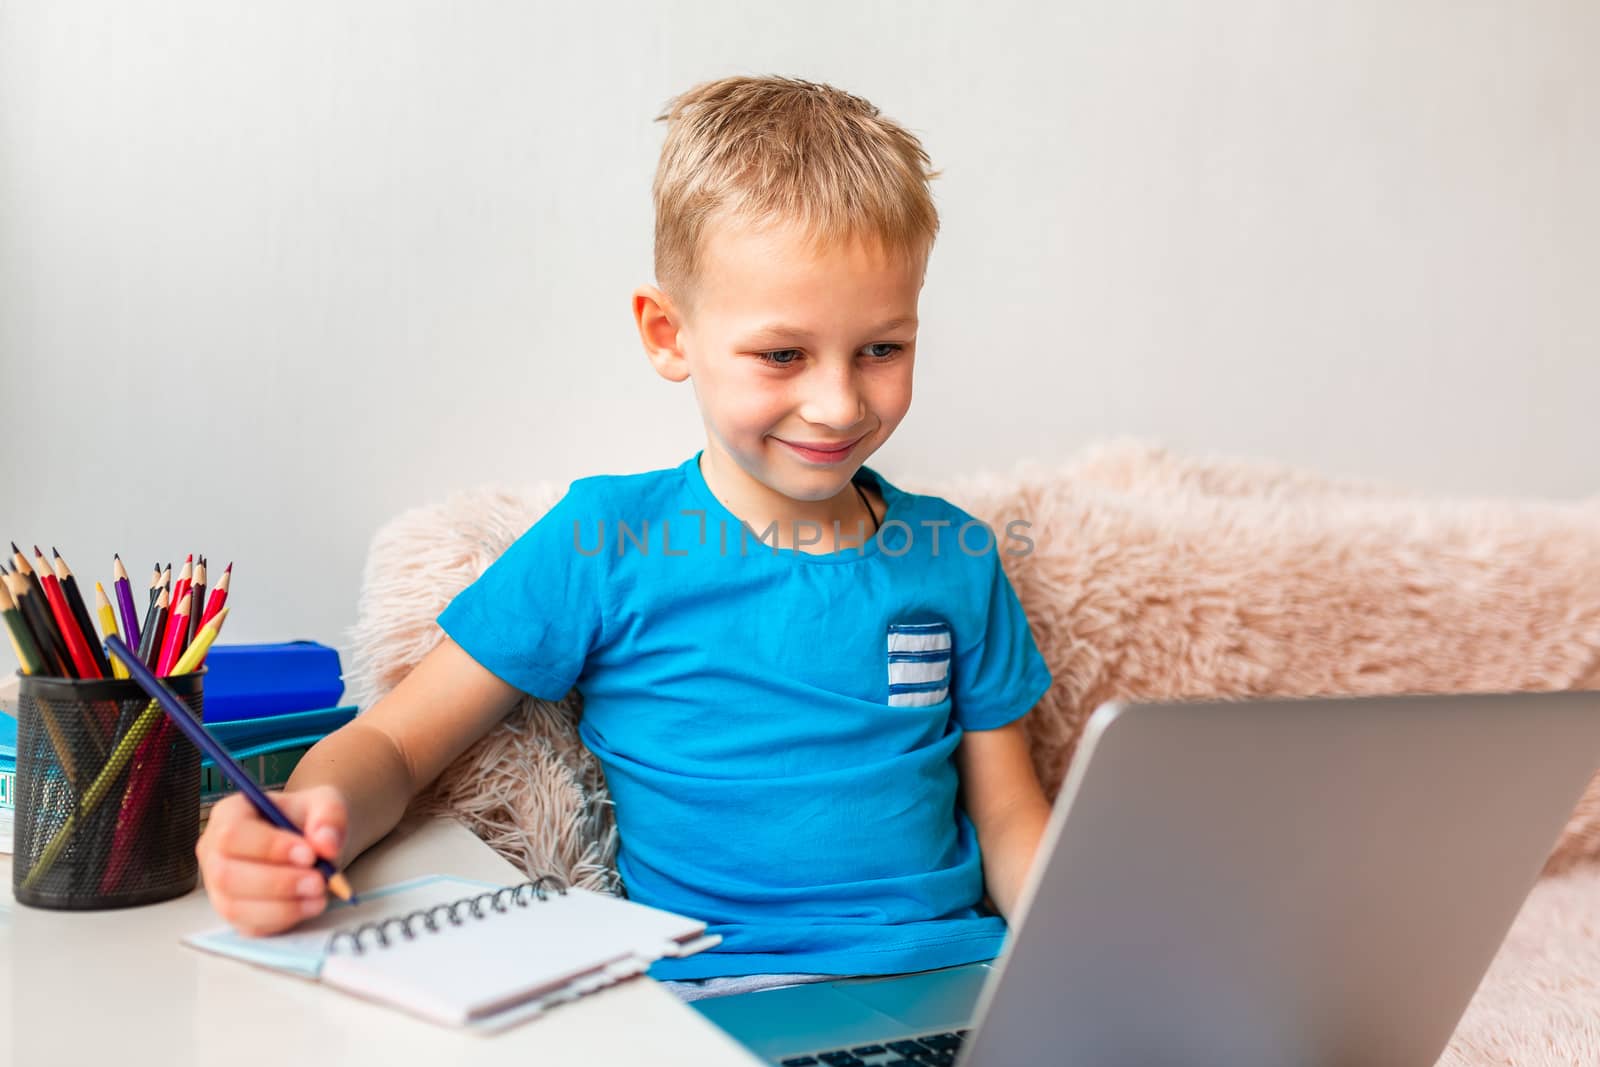 Little young school boy working at home with a laptop and class notes studying in a virtual class. Distance education and learning, e-learning, online learning concept during quarantine